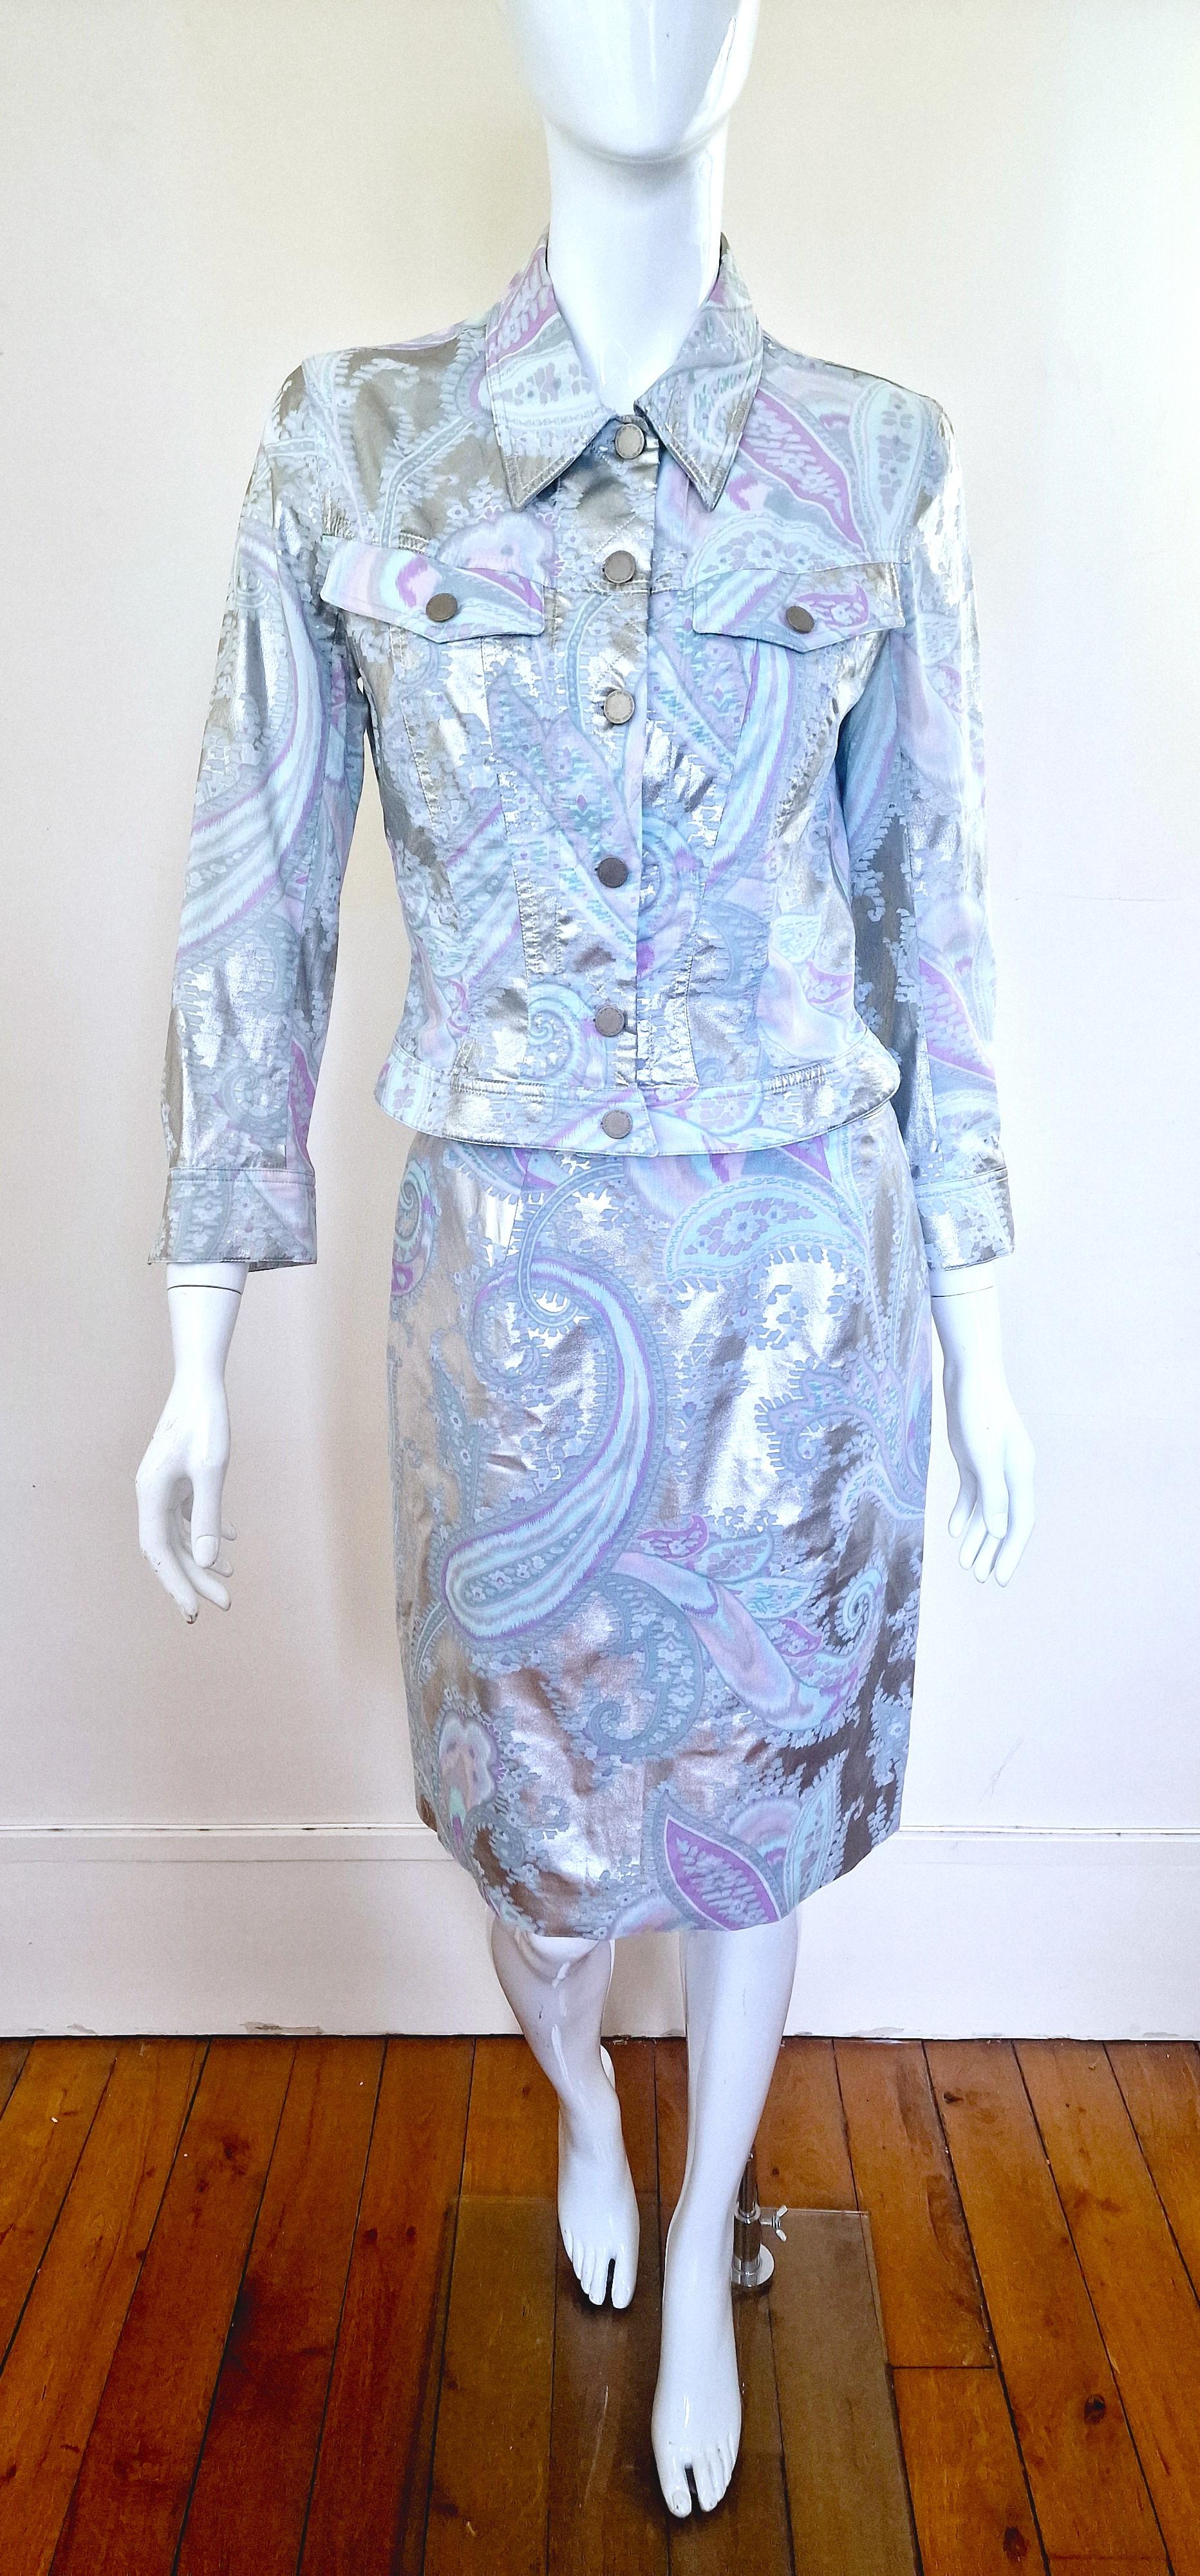 Silver paisley suit by Thierry Mugler!
With shoulder pads.
Wondeful silhouette! Wasp Waist, it emphasizes the waist.

VERY GOOD condition!

JAKCET
Small.
Marked size: FR36.
Length: 48 cm / 18.9 inch
Bust: 43 cm / 16.9 inch
Waist: 35 cm / 13.8